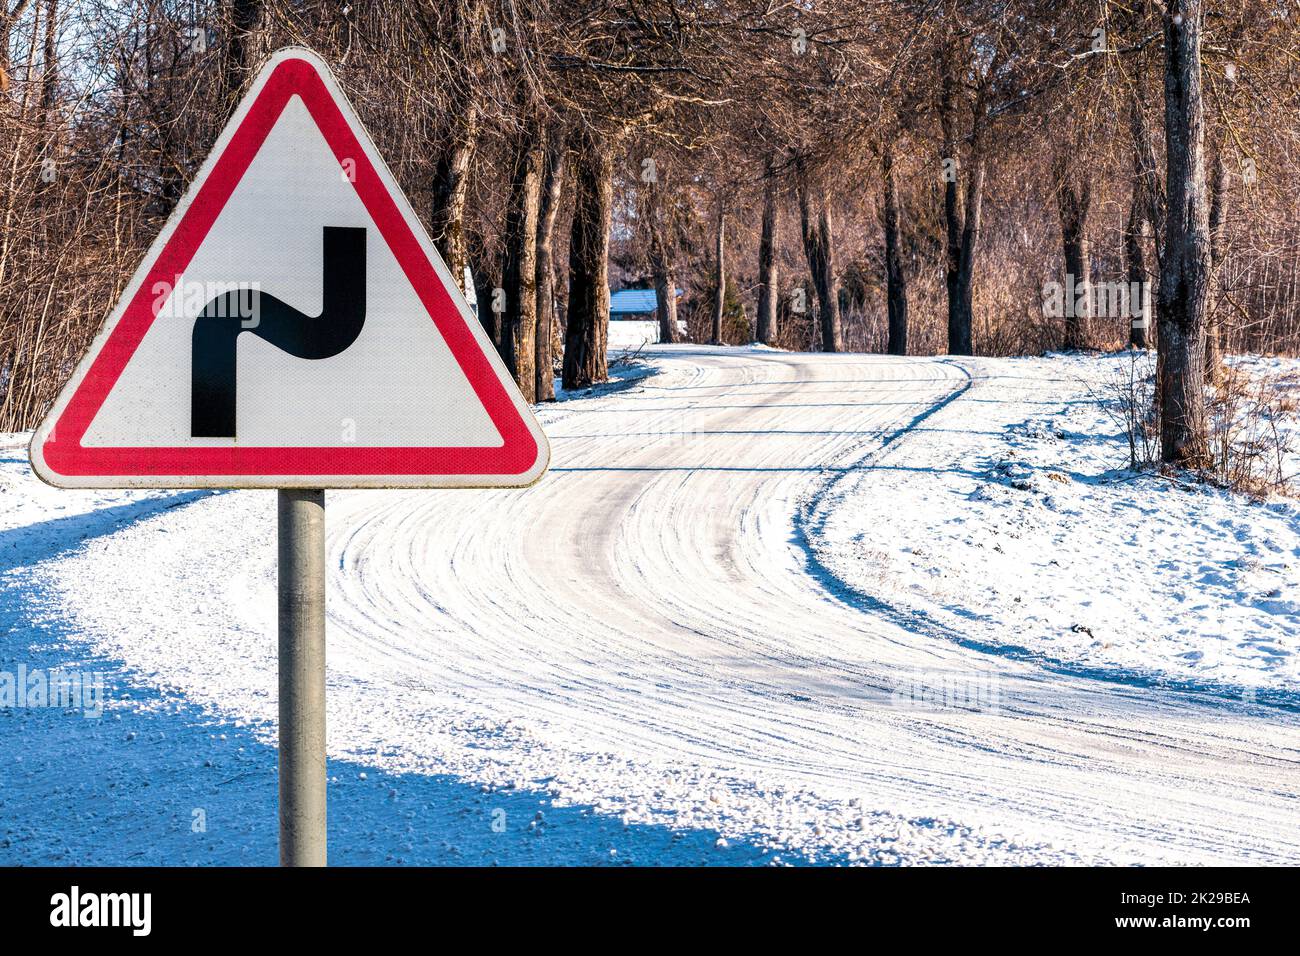 Road sign on a snow-covered road Stock Photo